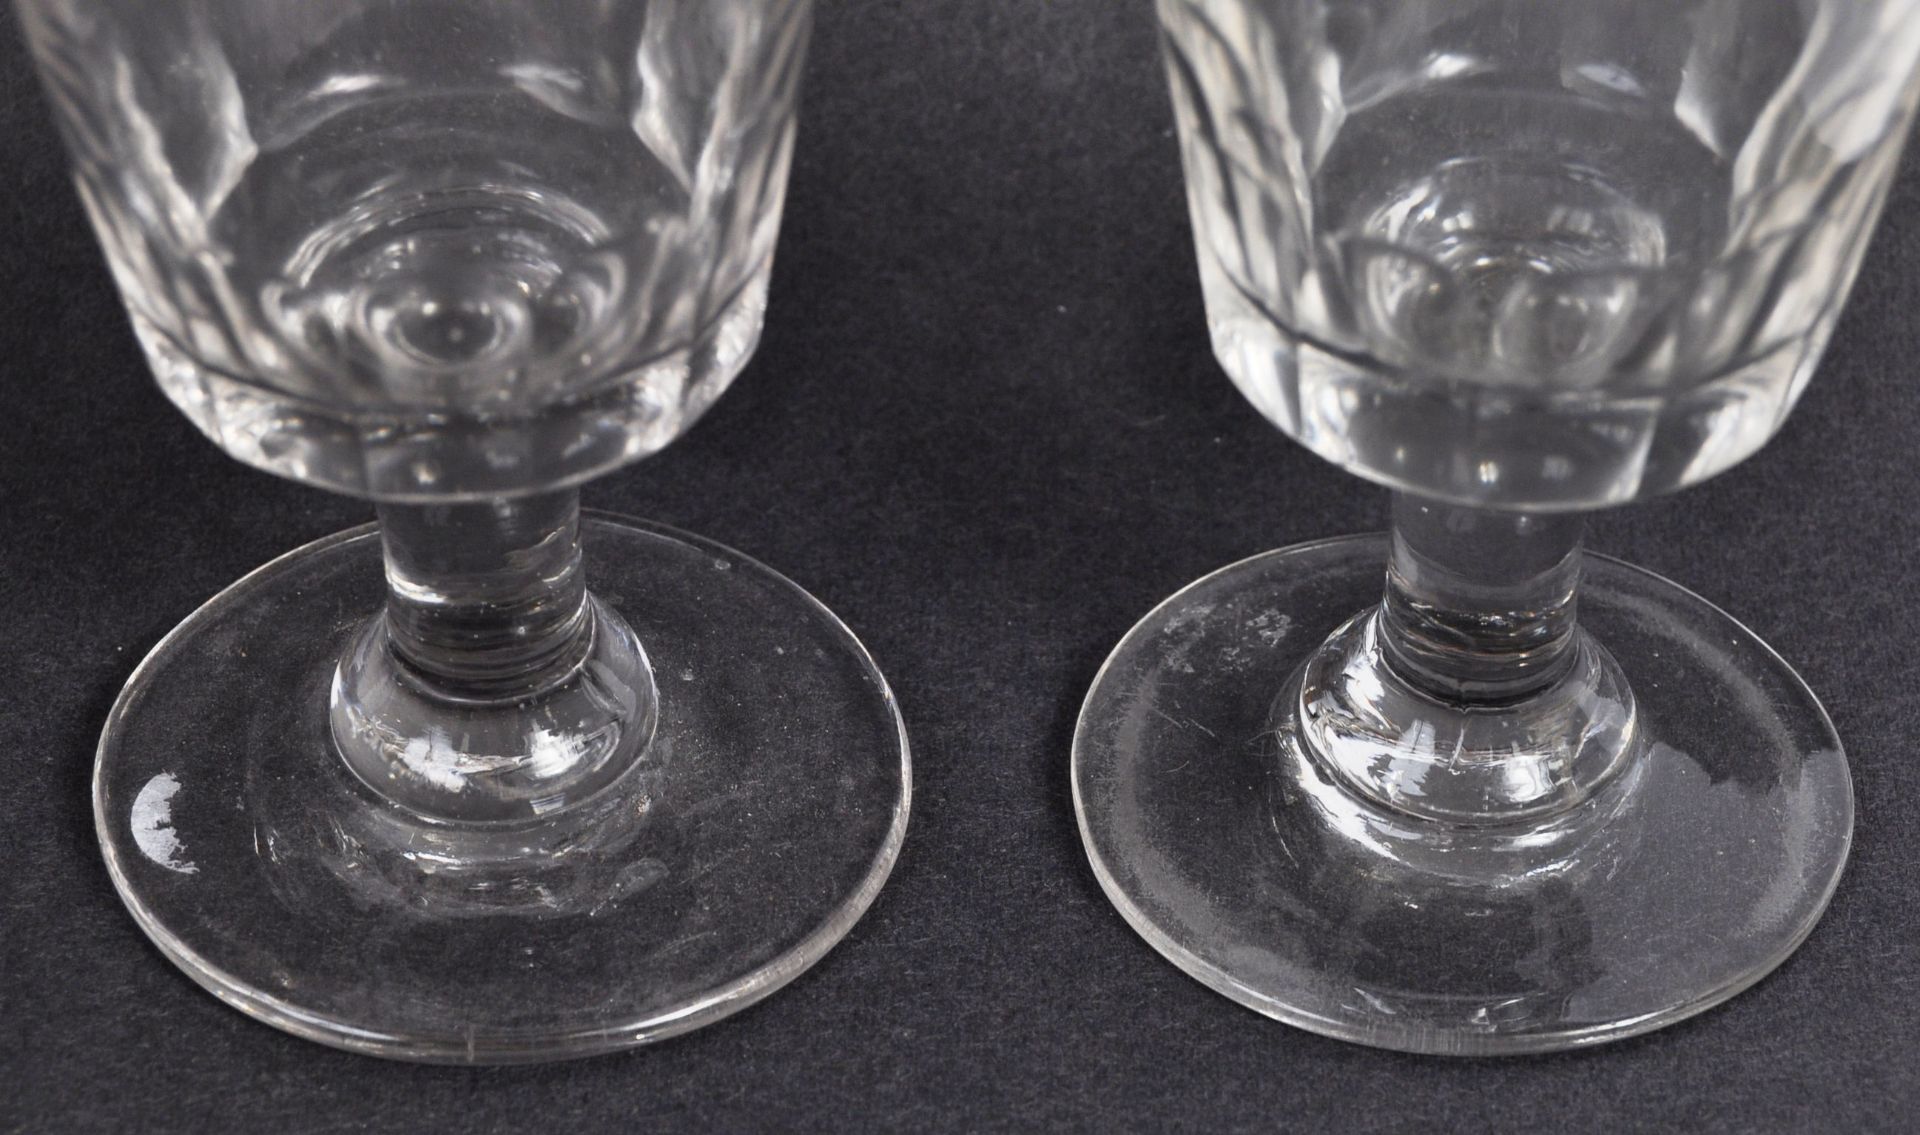 SET OF FOUR 19TH CENTURY VICTORIAN PANEL CUT BUCKET WINE GLASSES - Image 5 of 6